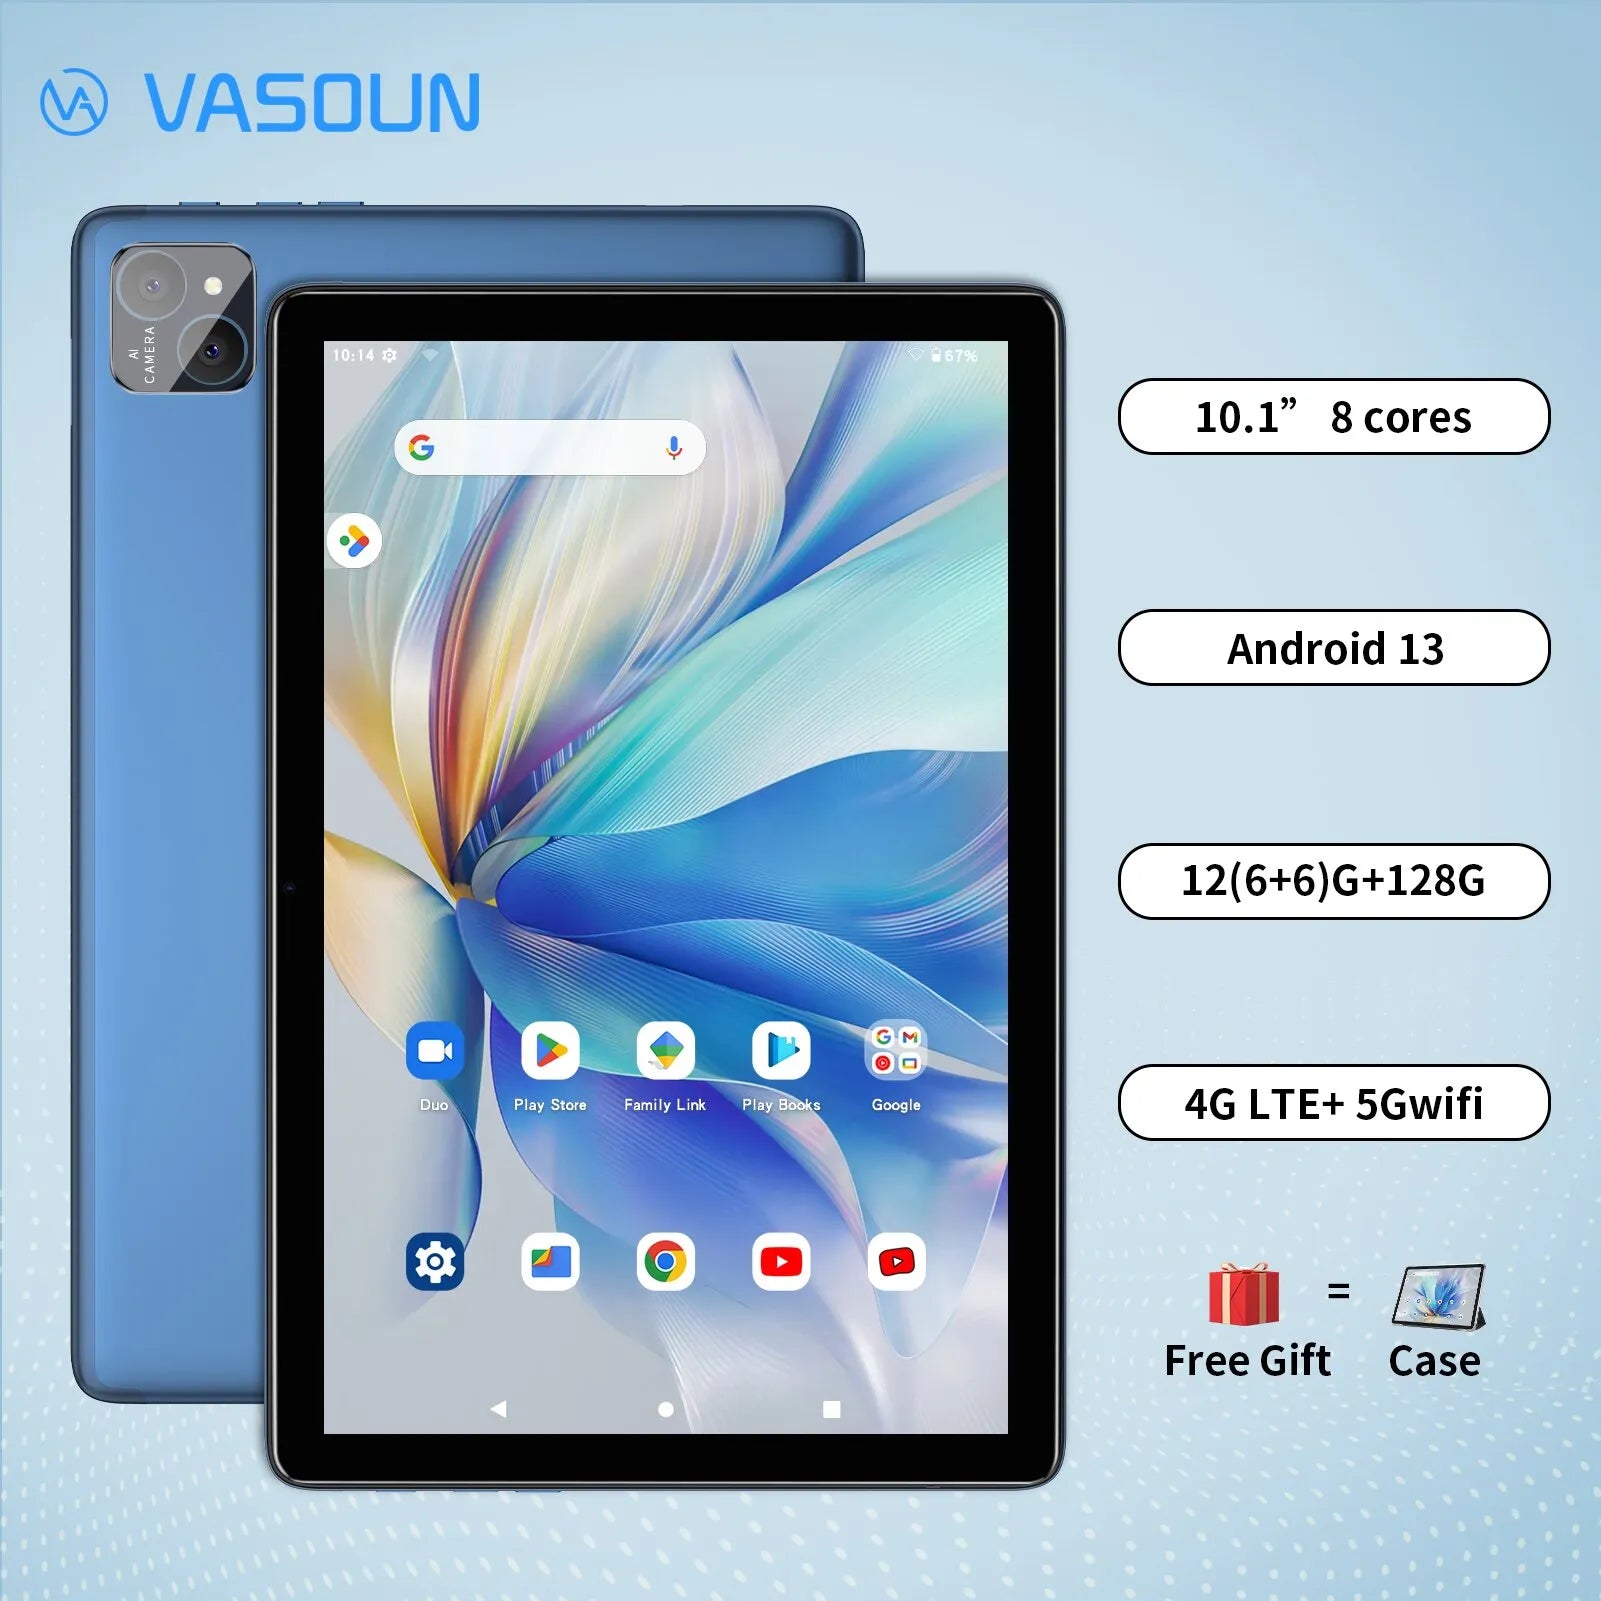 VASOUN Android 13 Tablet: Ultimate Performance 10.1" Device With Dual Cameras  computerlum.com   